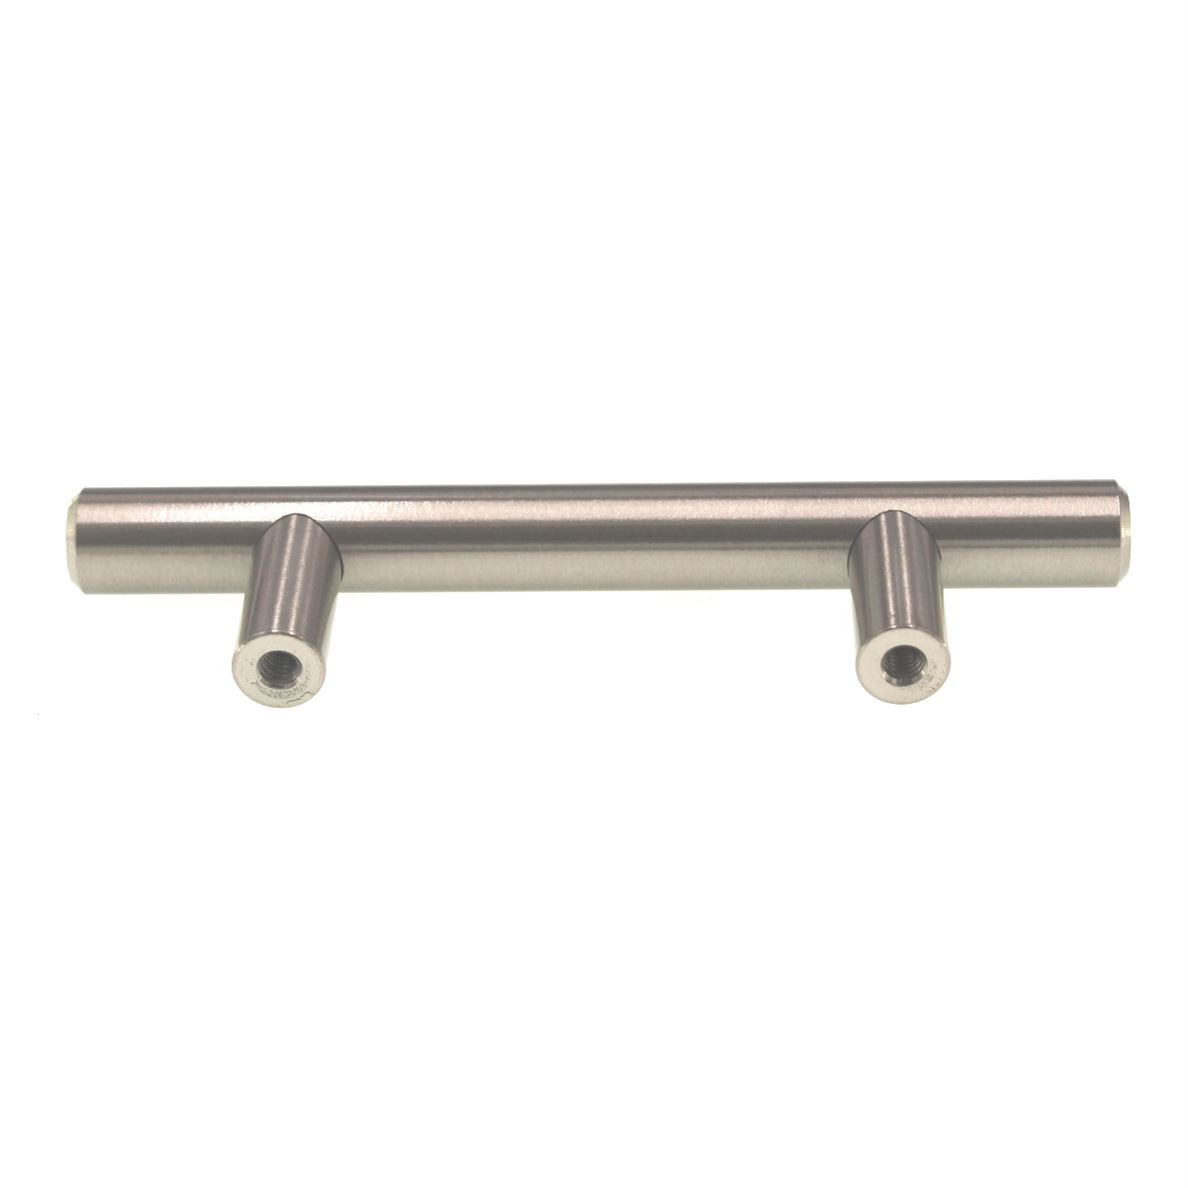 Liberty Stainless Steel 2 1/2" (64mm) Ctr. Sleek Cabinet Bar Pull P01011-SS